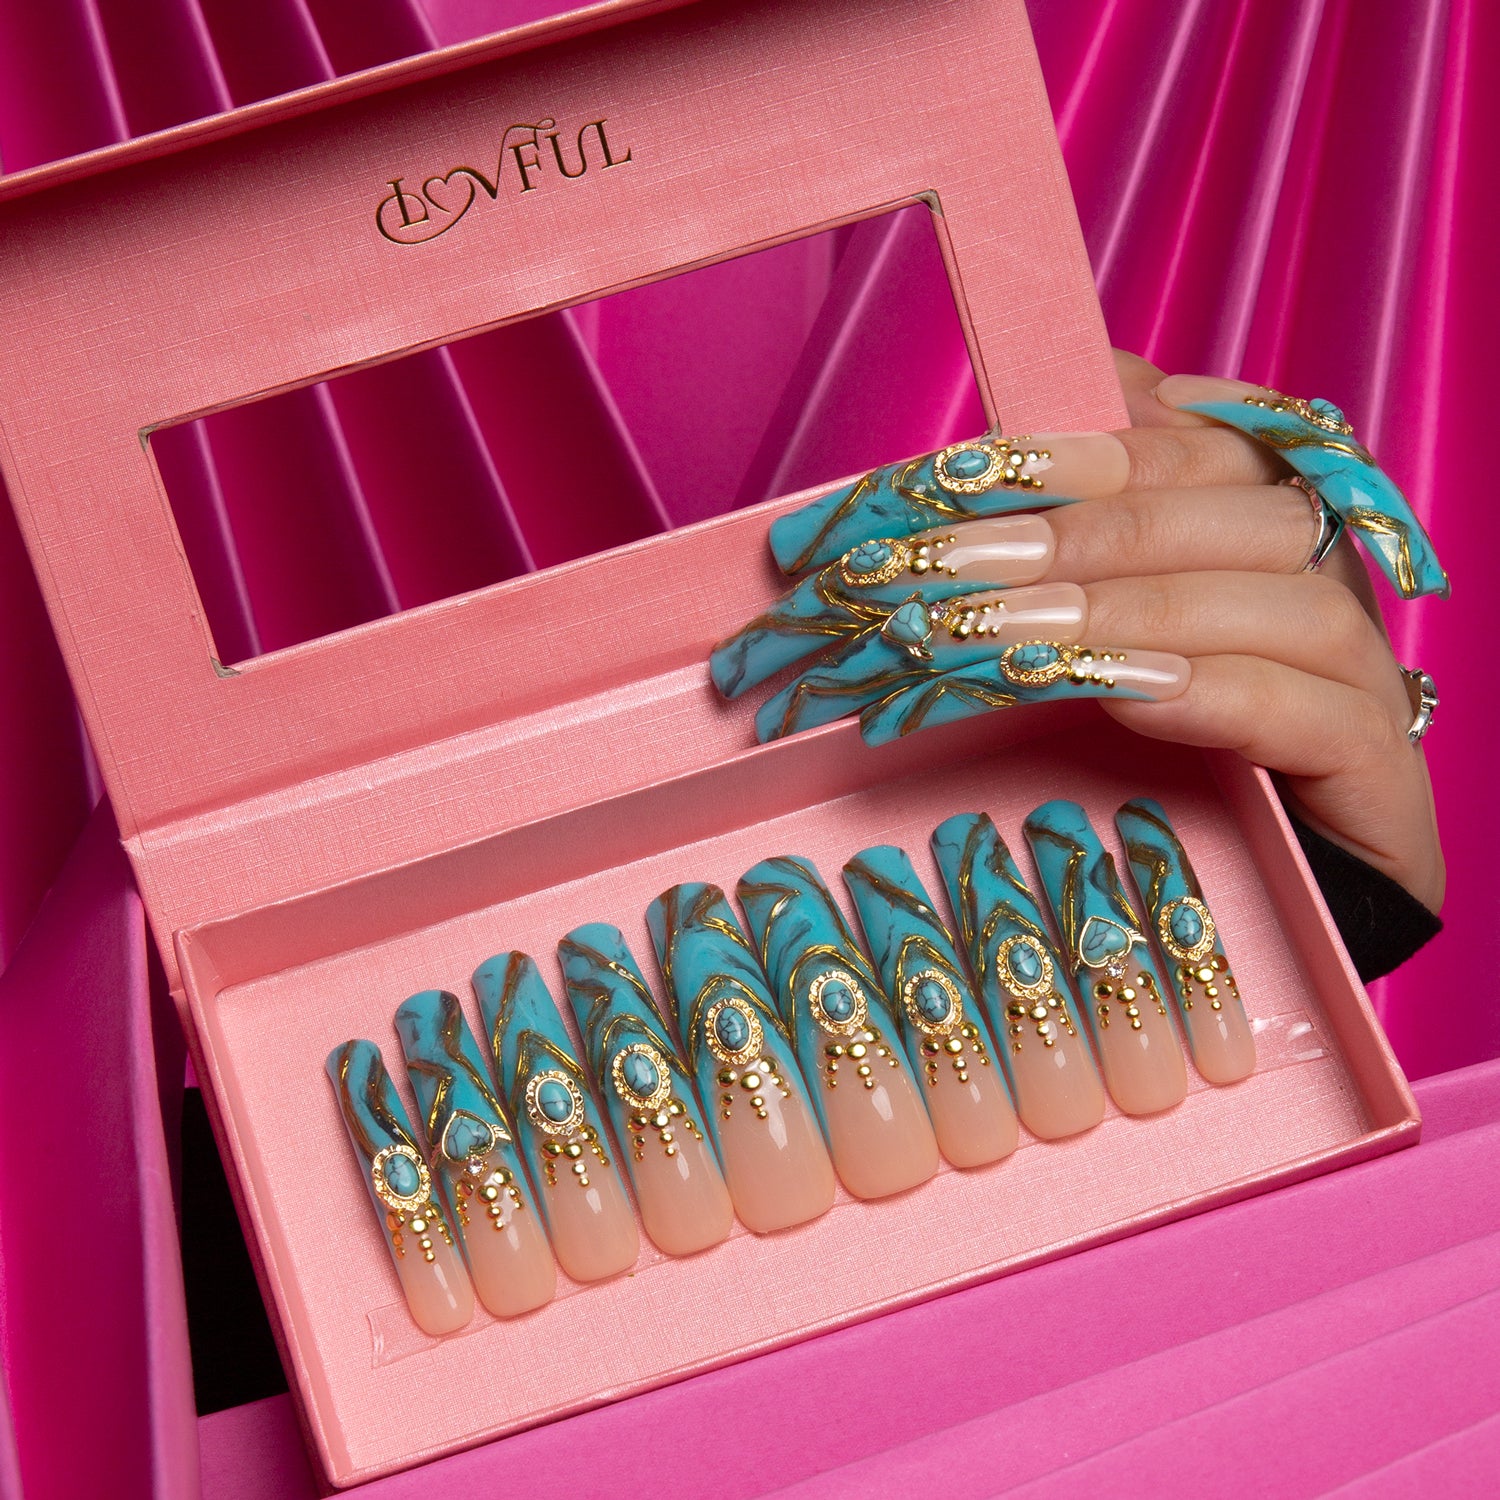 Hand displaying luxurious press-on acrylic nails with turquoise and gold designs, featuring sparkling gems. The nails are placed in a pink Lovful box, perfect for glamorous events.